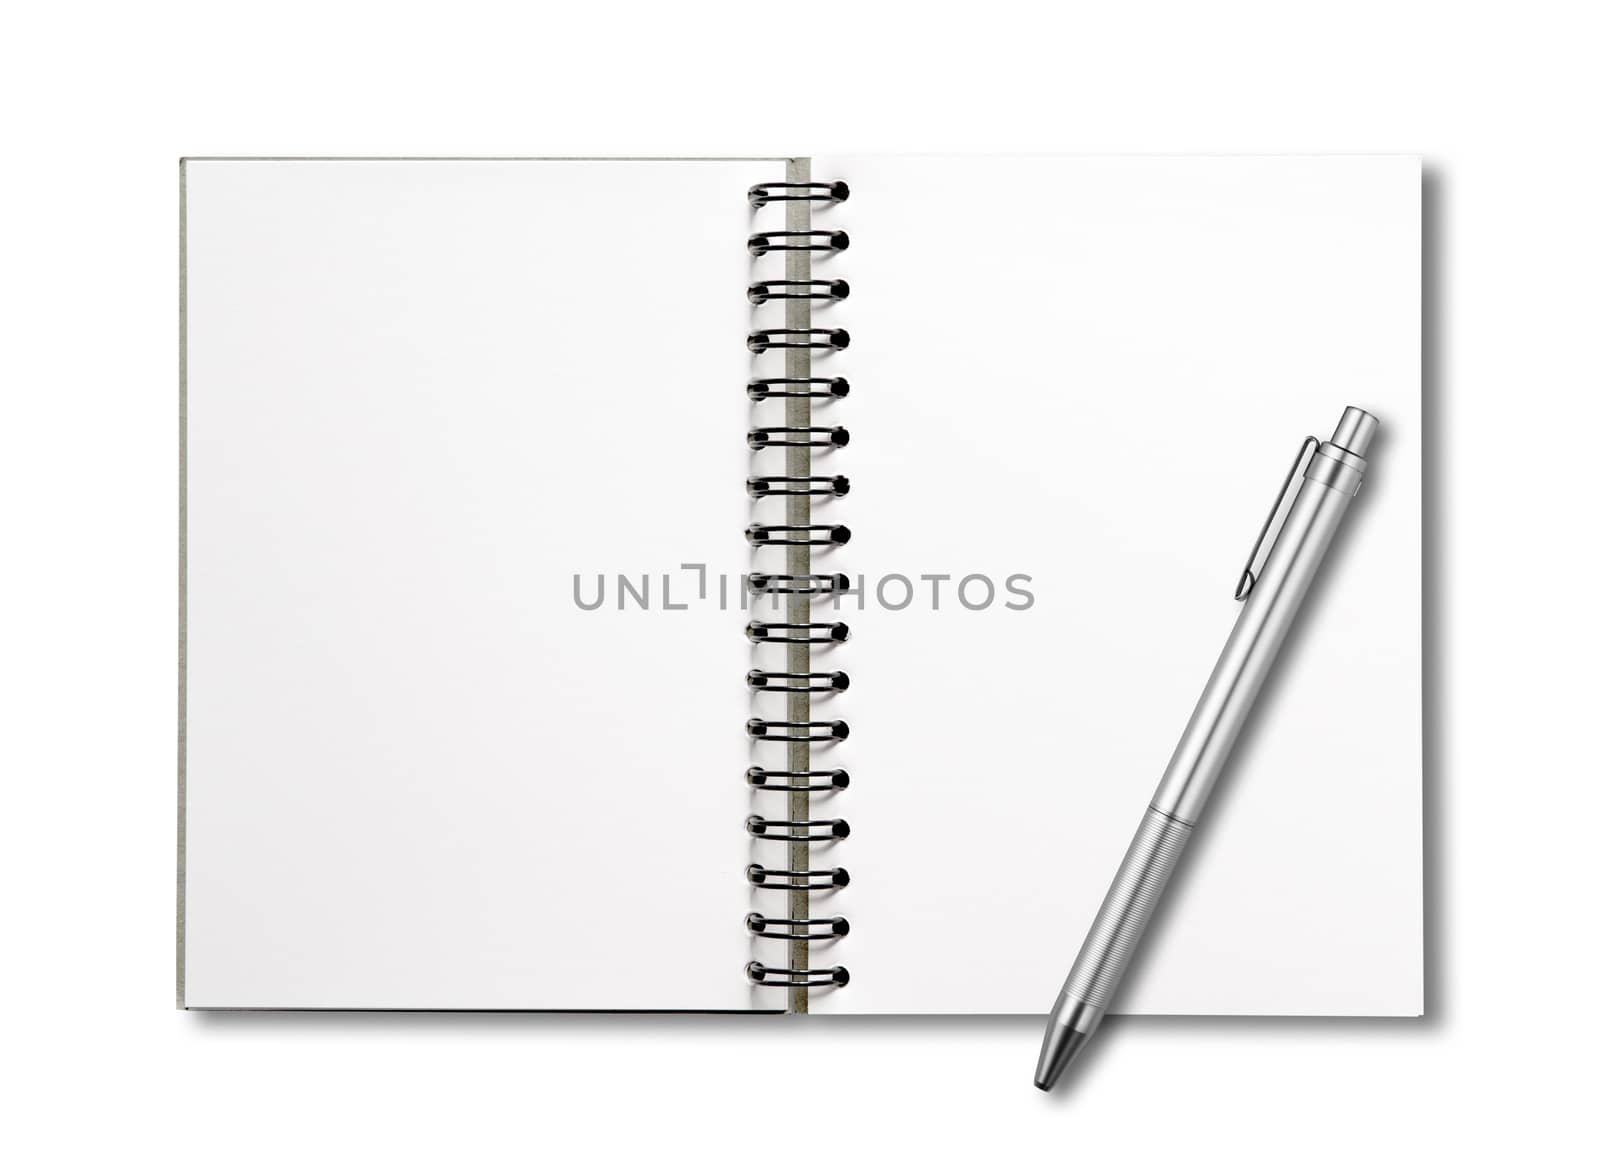 Blank open spiral notebook and pen isolated on white by daboost